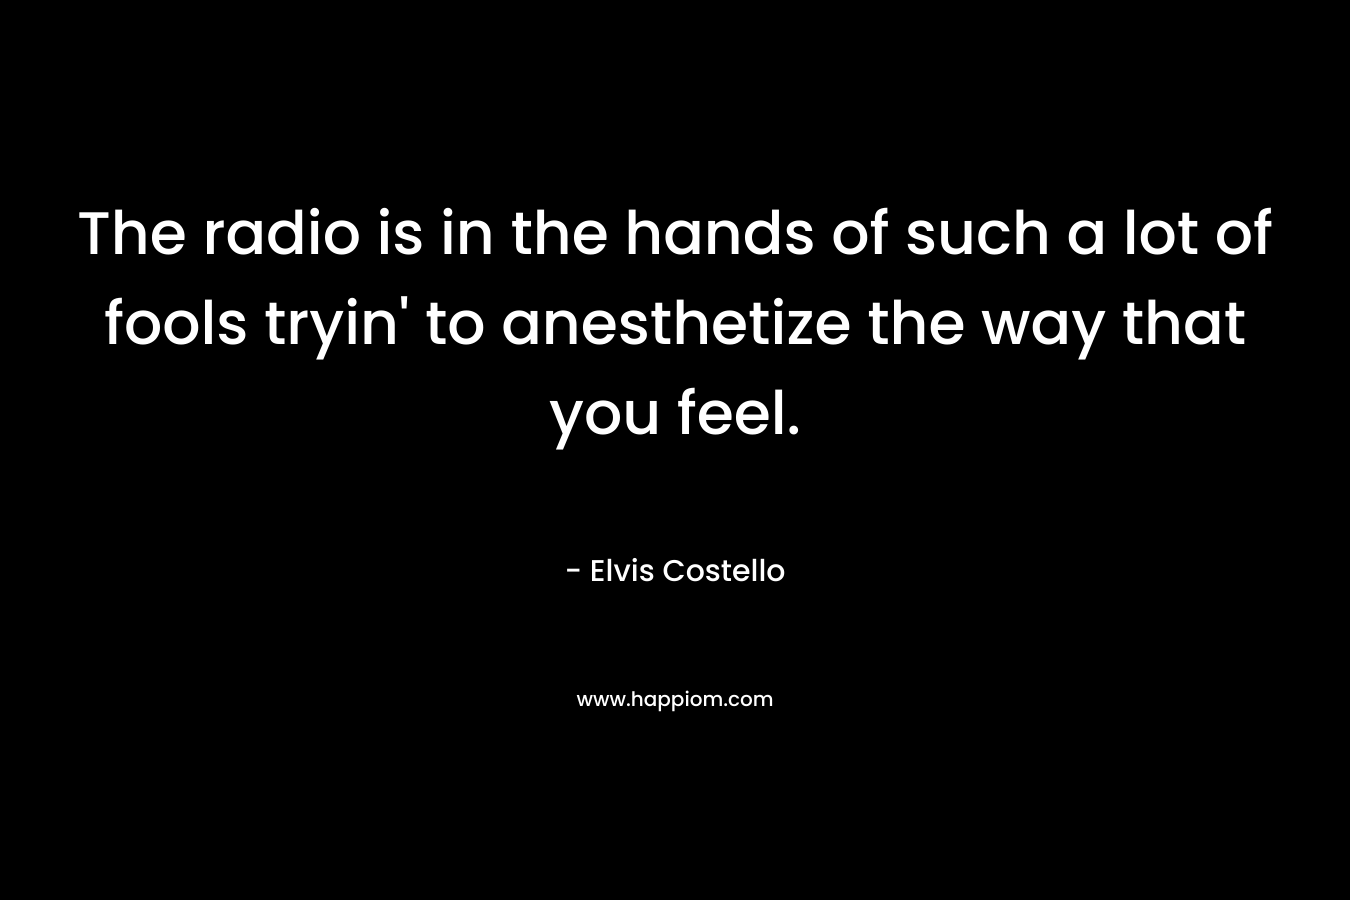 The radio is in the hands of such a lot of fools tryin' to anesthetize the way that you feel.